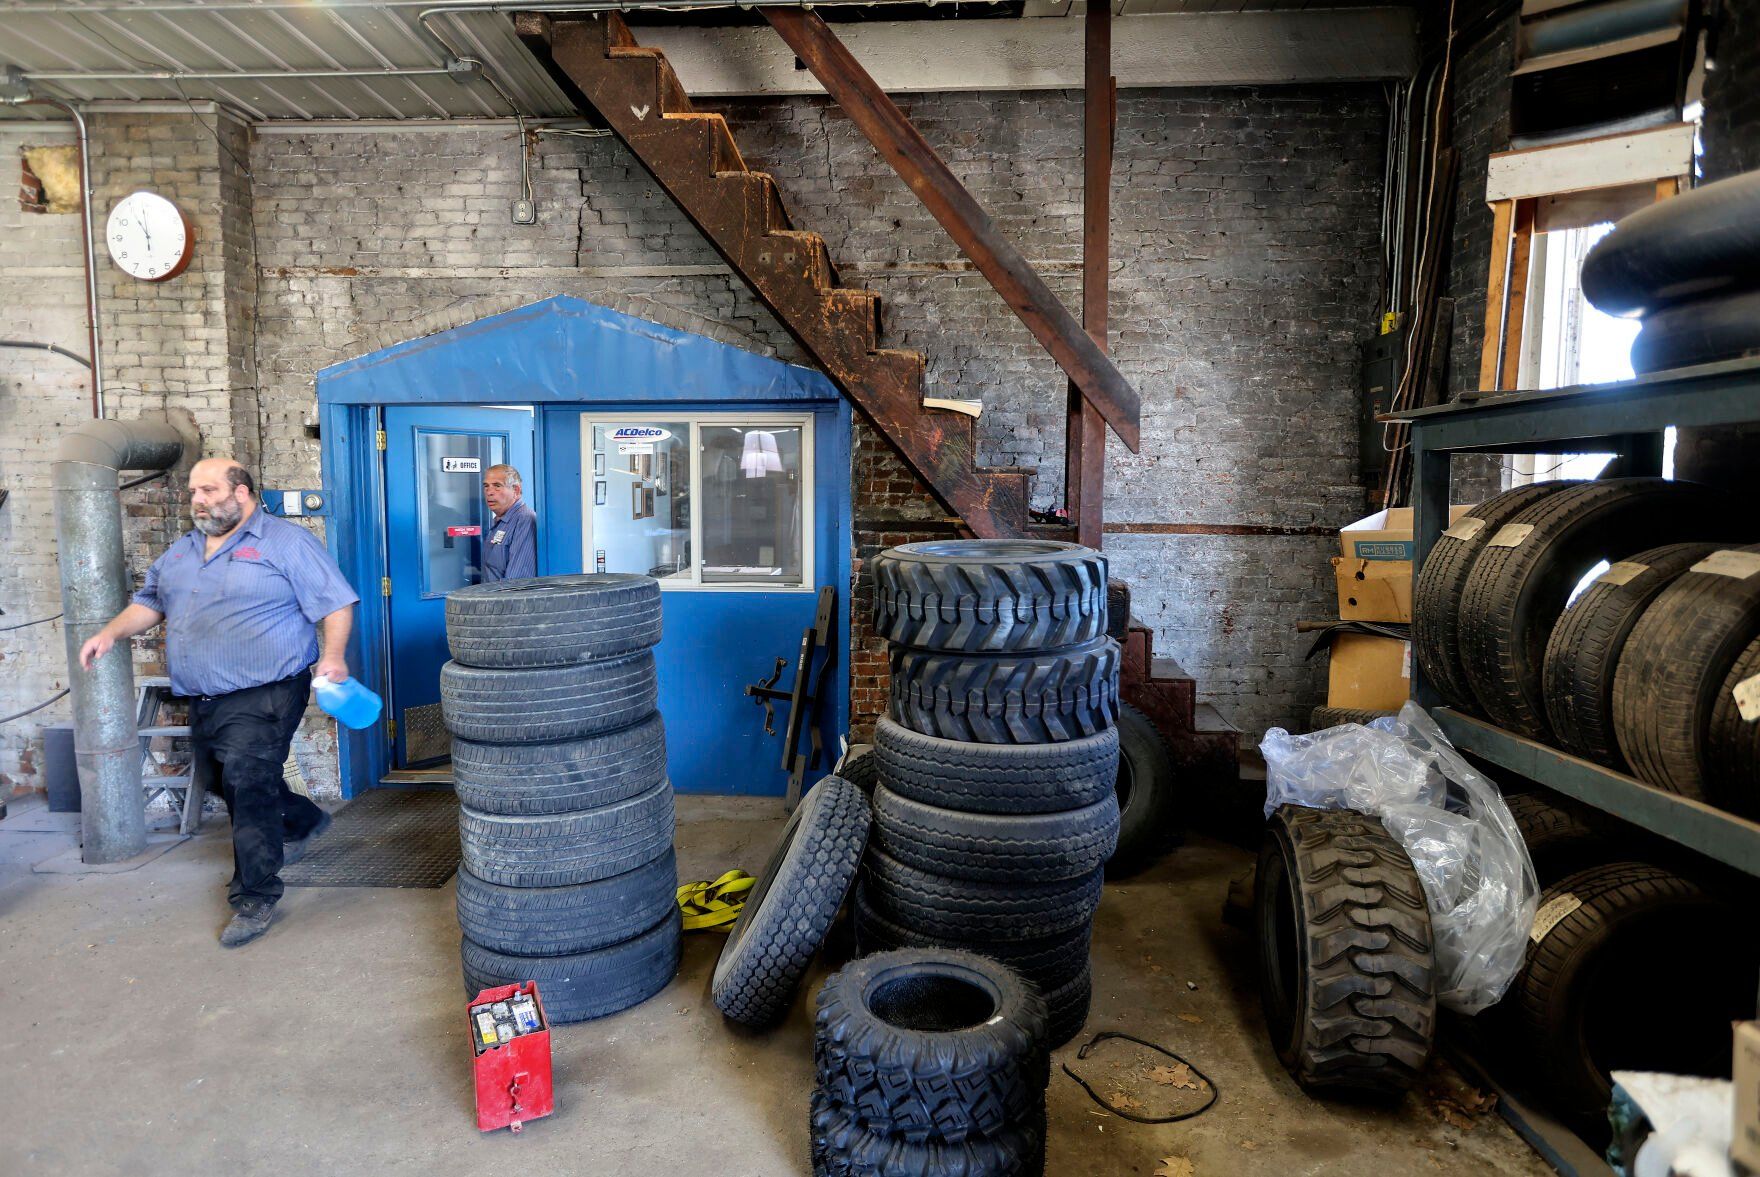 Tom Spoerl (left) and his father, John, go to work in the garage at Spoerl Automotive in Sherrill, Iowa. The business has been operating at the same location since 1917.    PHOTO CREDIT: Dave Kettering
Telegraph Herald